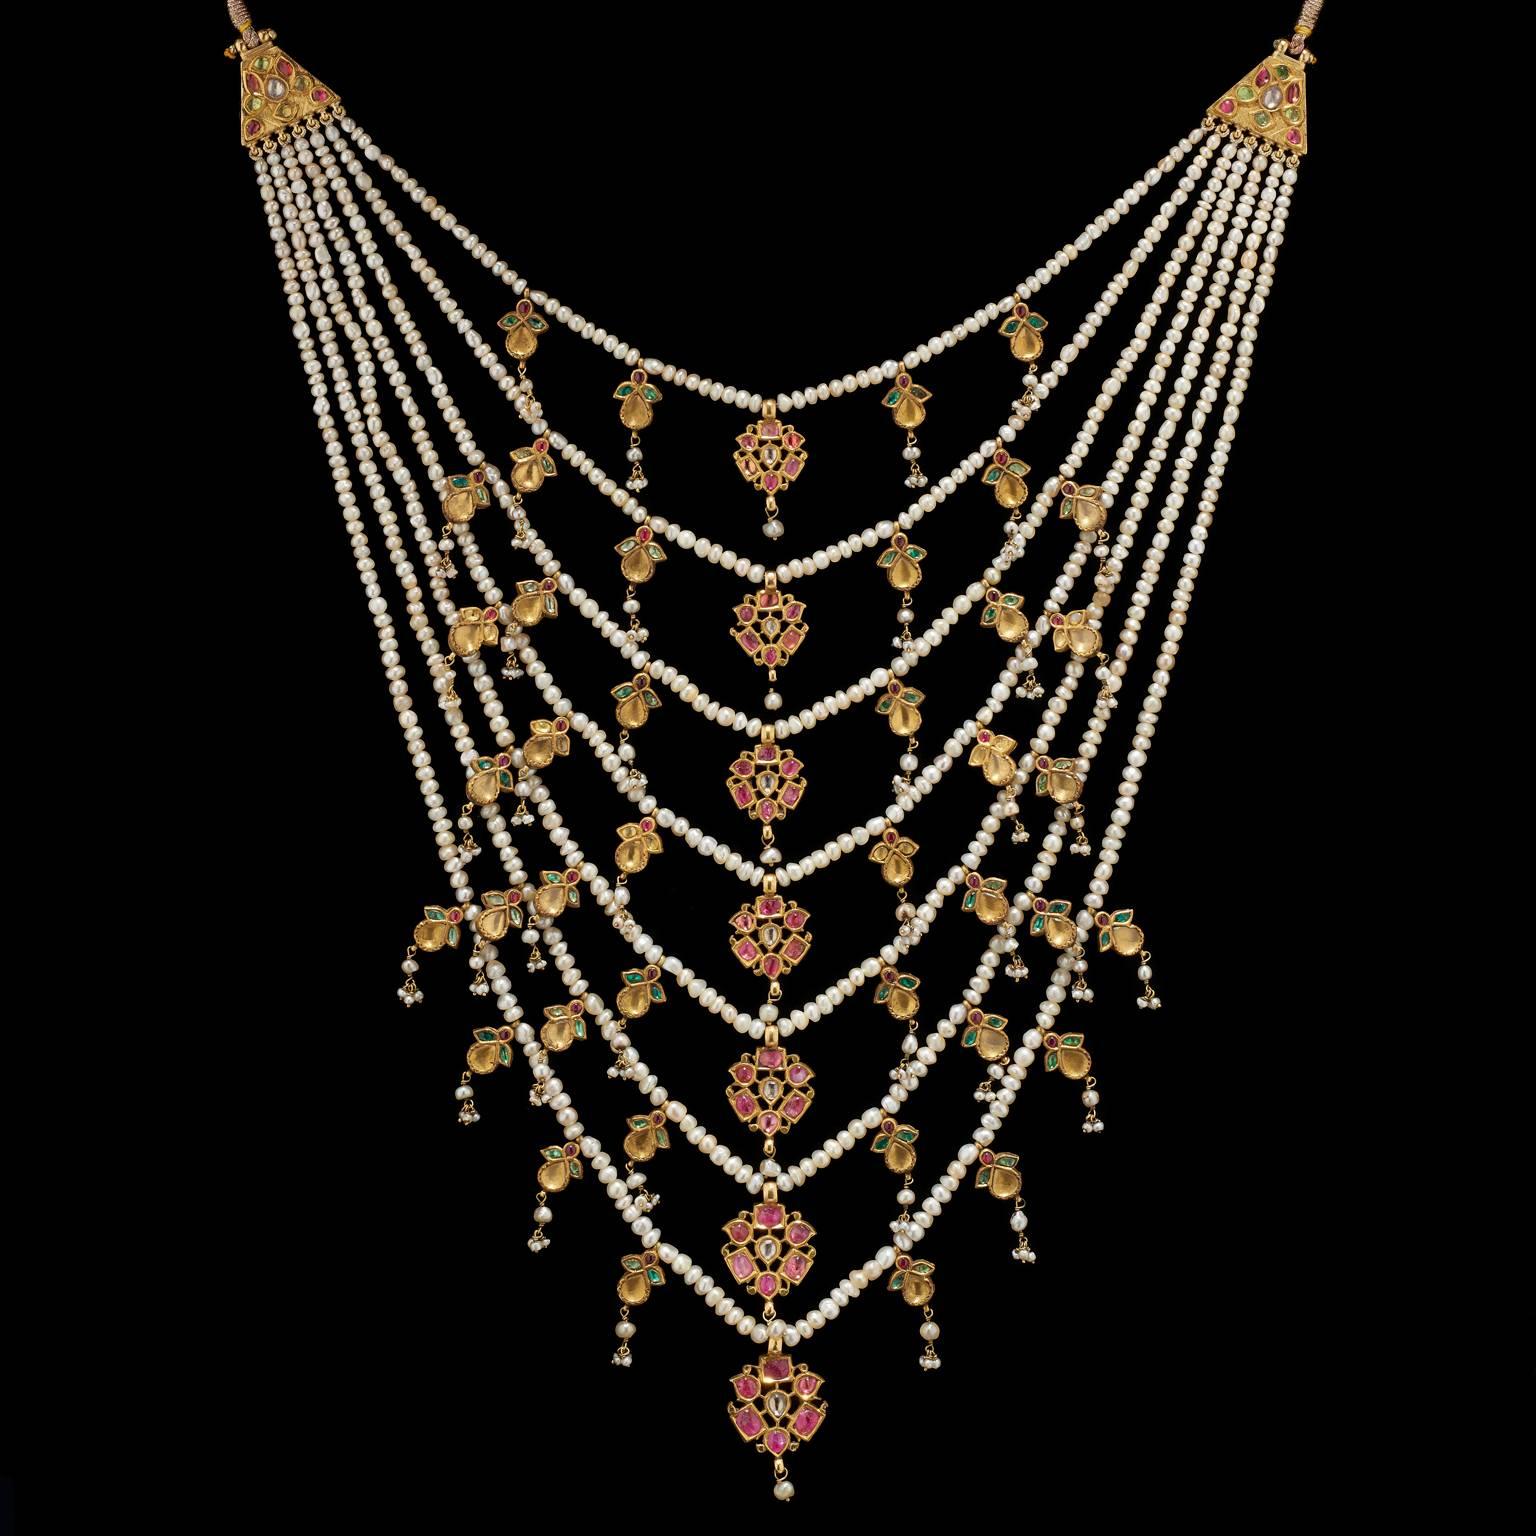 Necklace
Mughal, North India
18th Century

A seven row (satlara) necklace set on seven strings of natural pearls. The central pendants are gold set with rubies and emeralds forming stylized floral motifs. Each strand has smaller pendants on